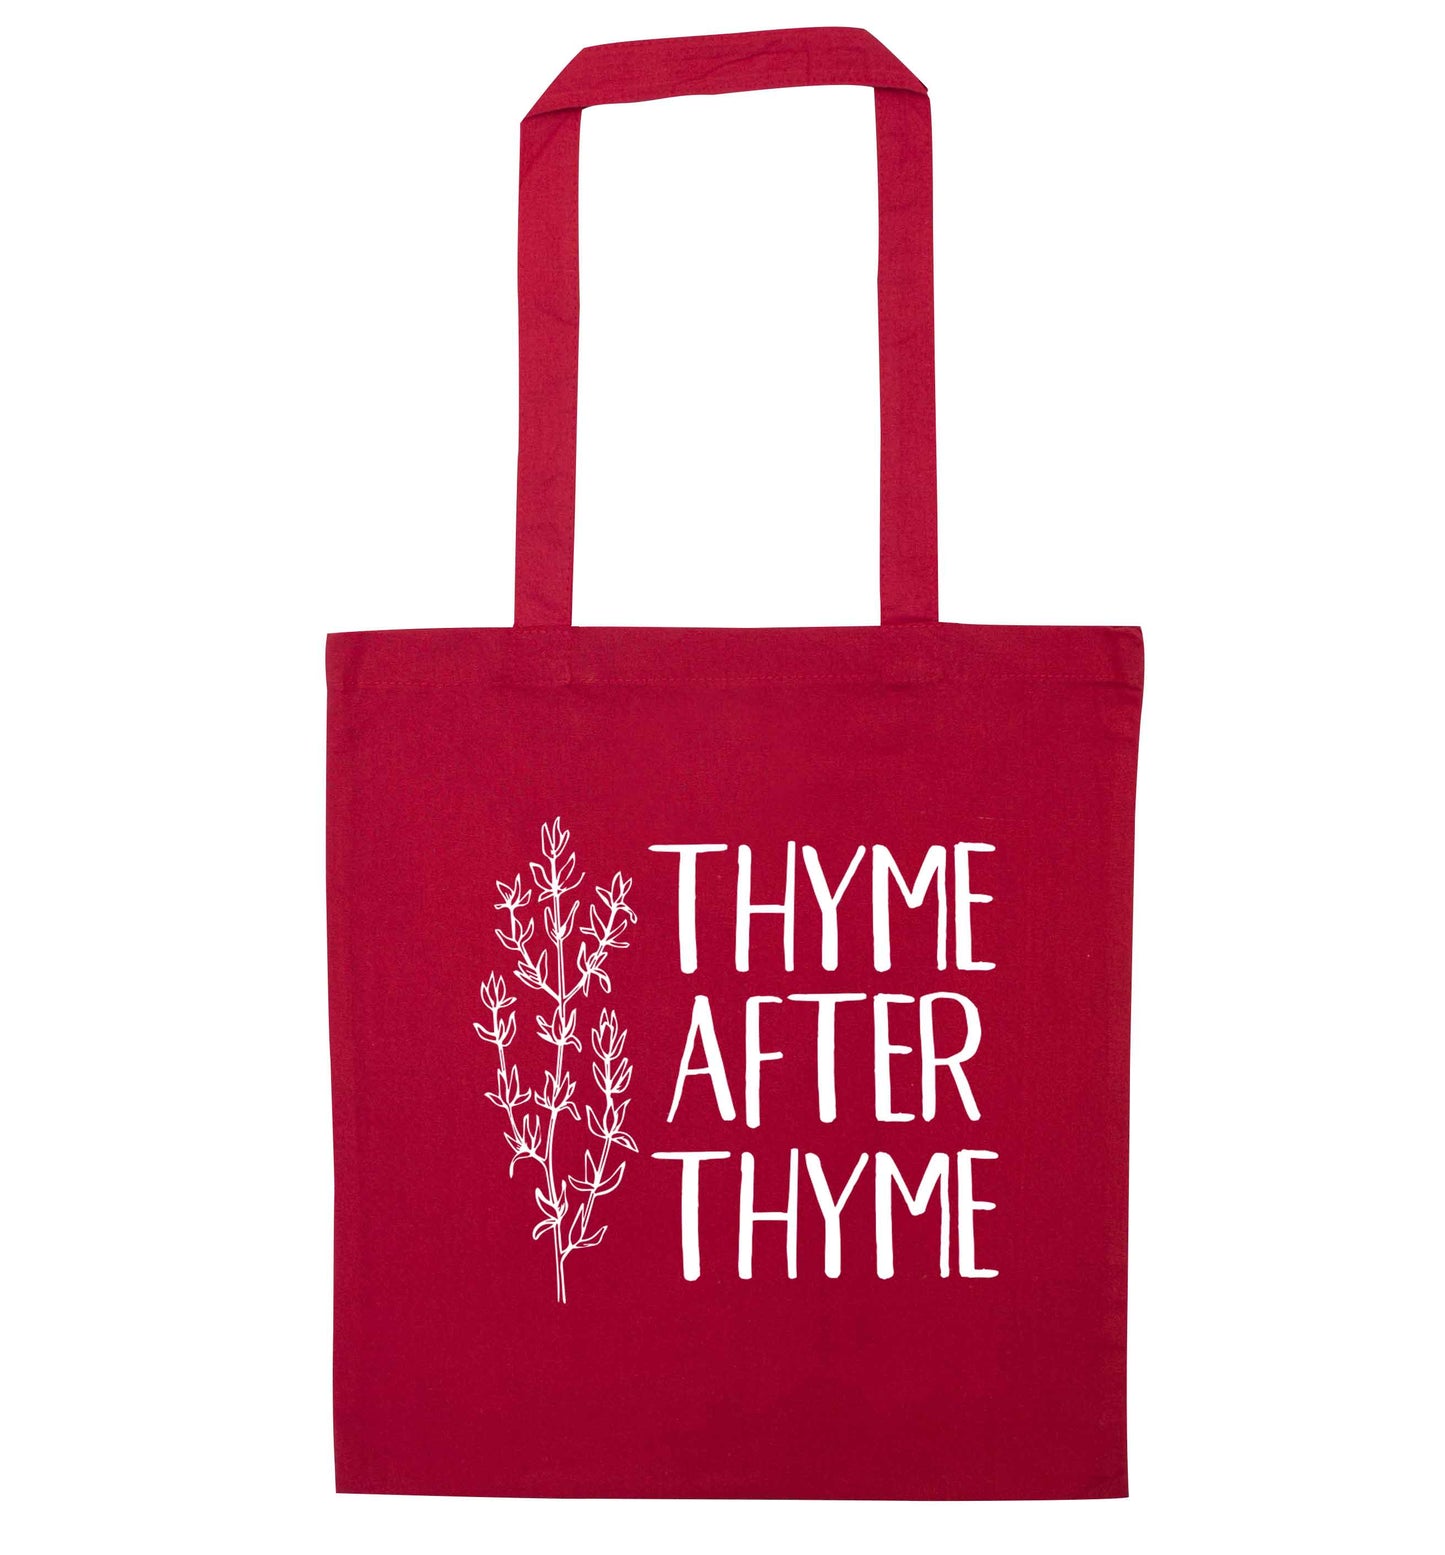 Thyme after thyme red tote bag